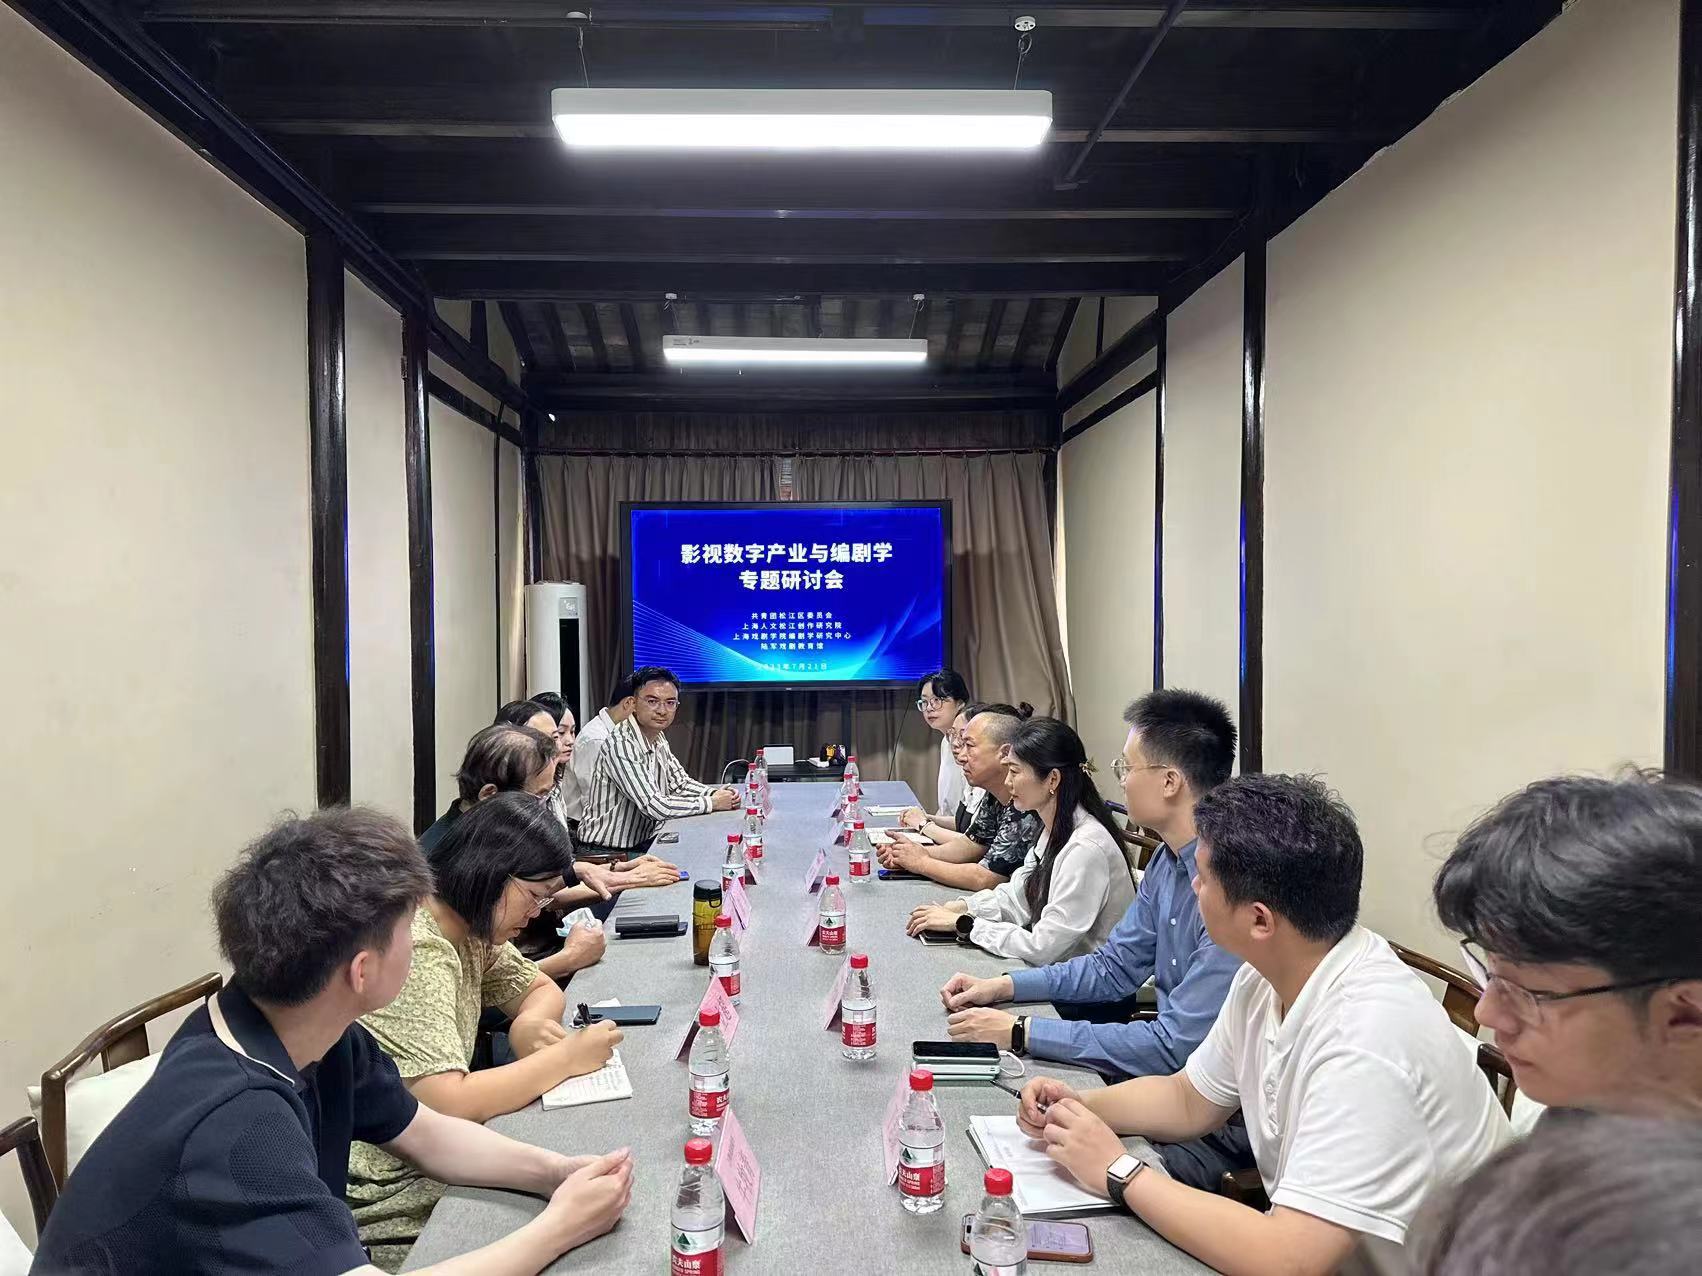 Shanghai Science and Technology Film City promotes cross-border cooperation between the digital film and television industry and screenwriting, always adhering to the principle of content as the king of digital | industry | science and technology film